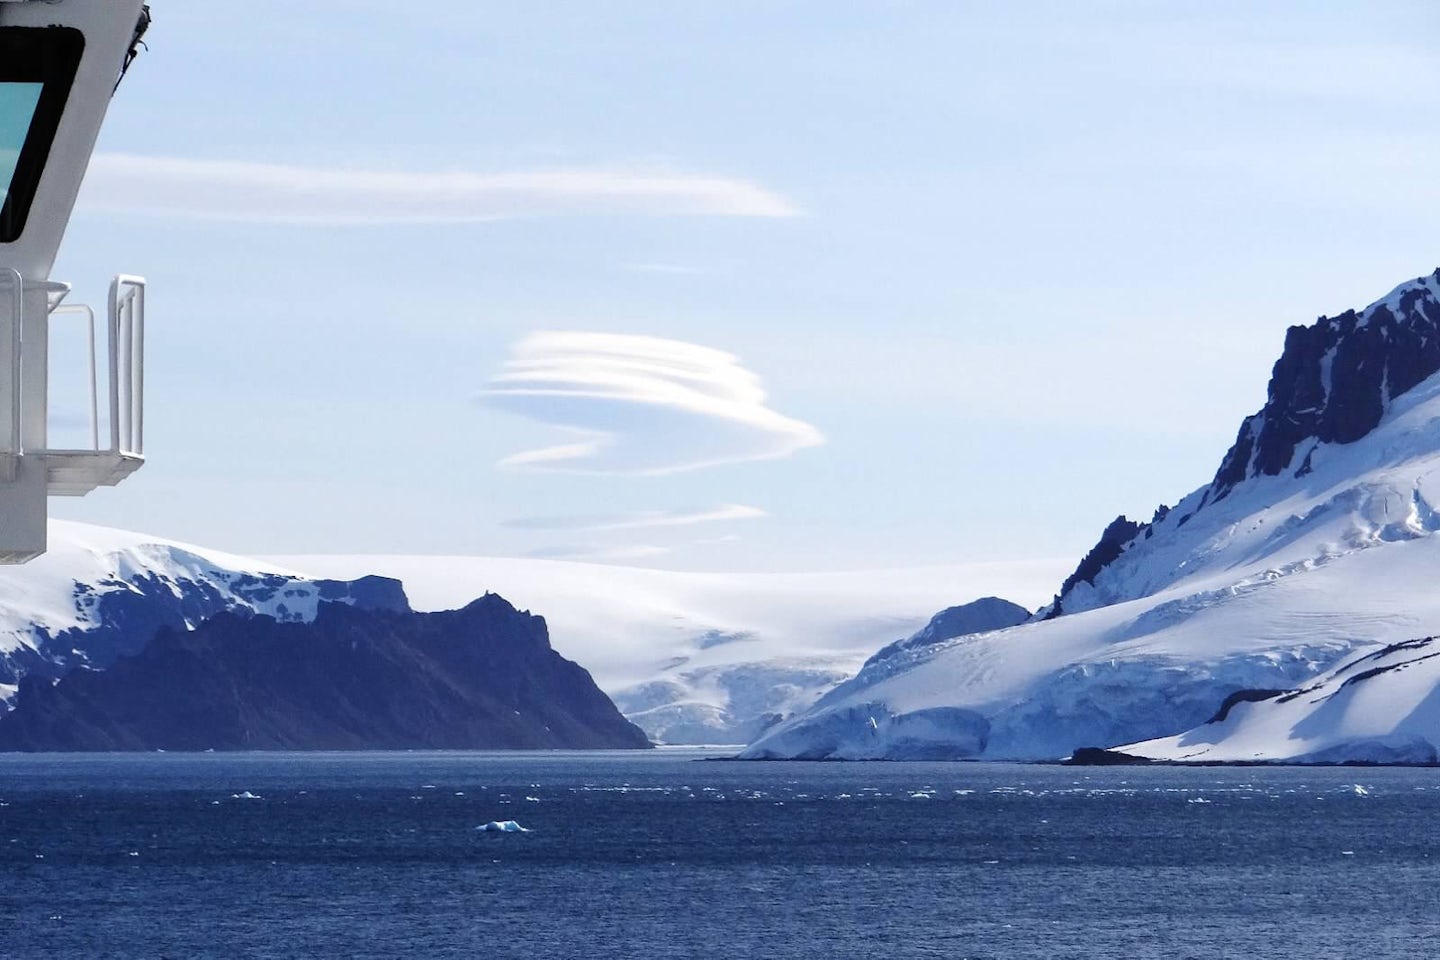 Lenticular clouds in Antarctica - view from our verandah